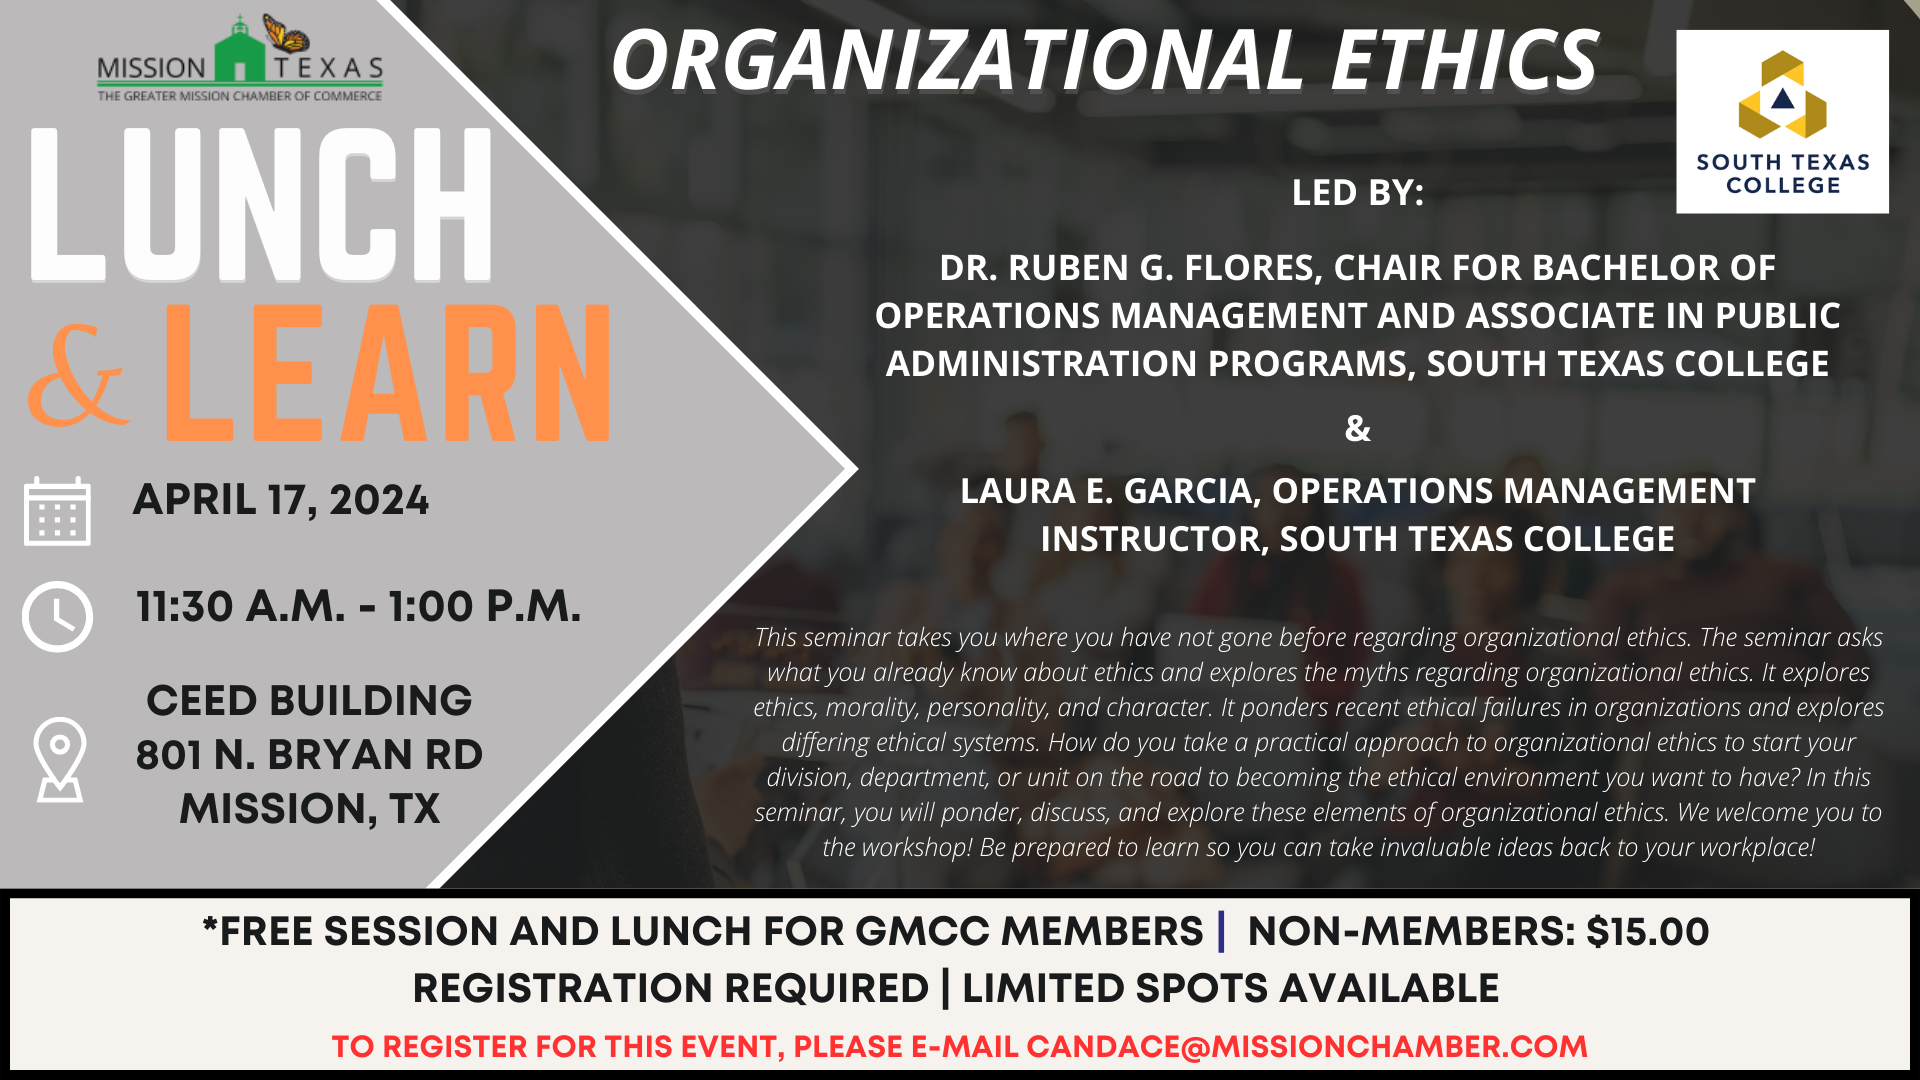 Explore Organizational Ethics at GMCC’s Lunch & Learn Series